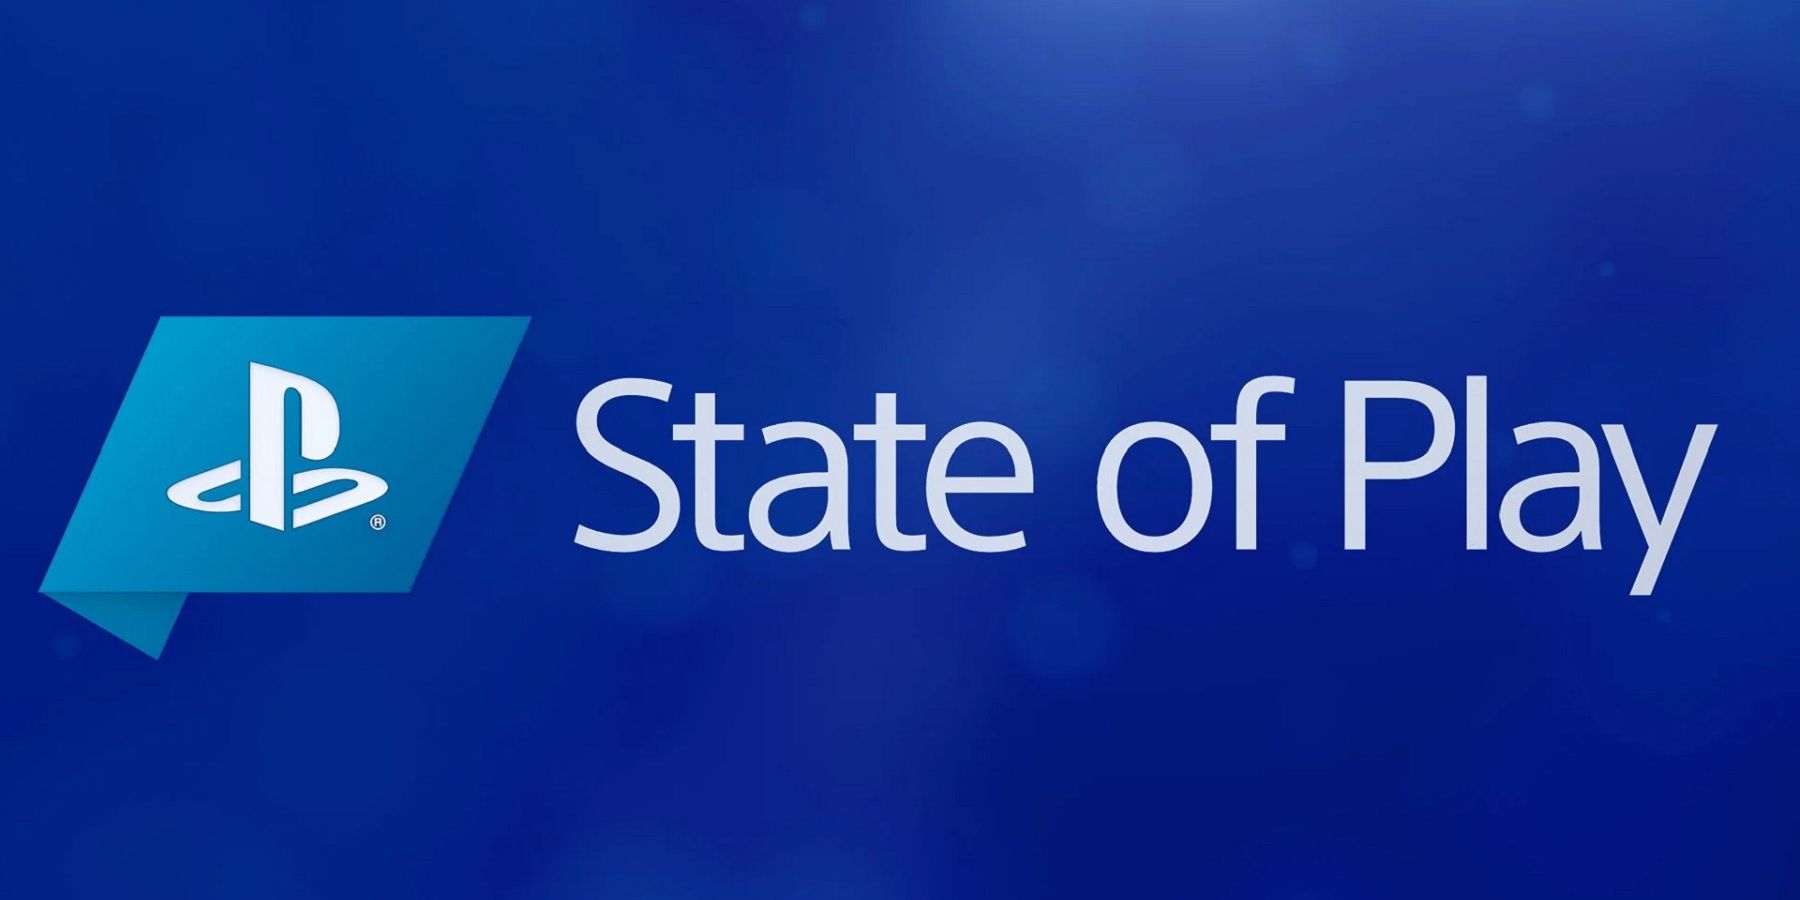 playstation state of play logo